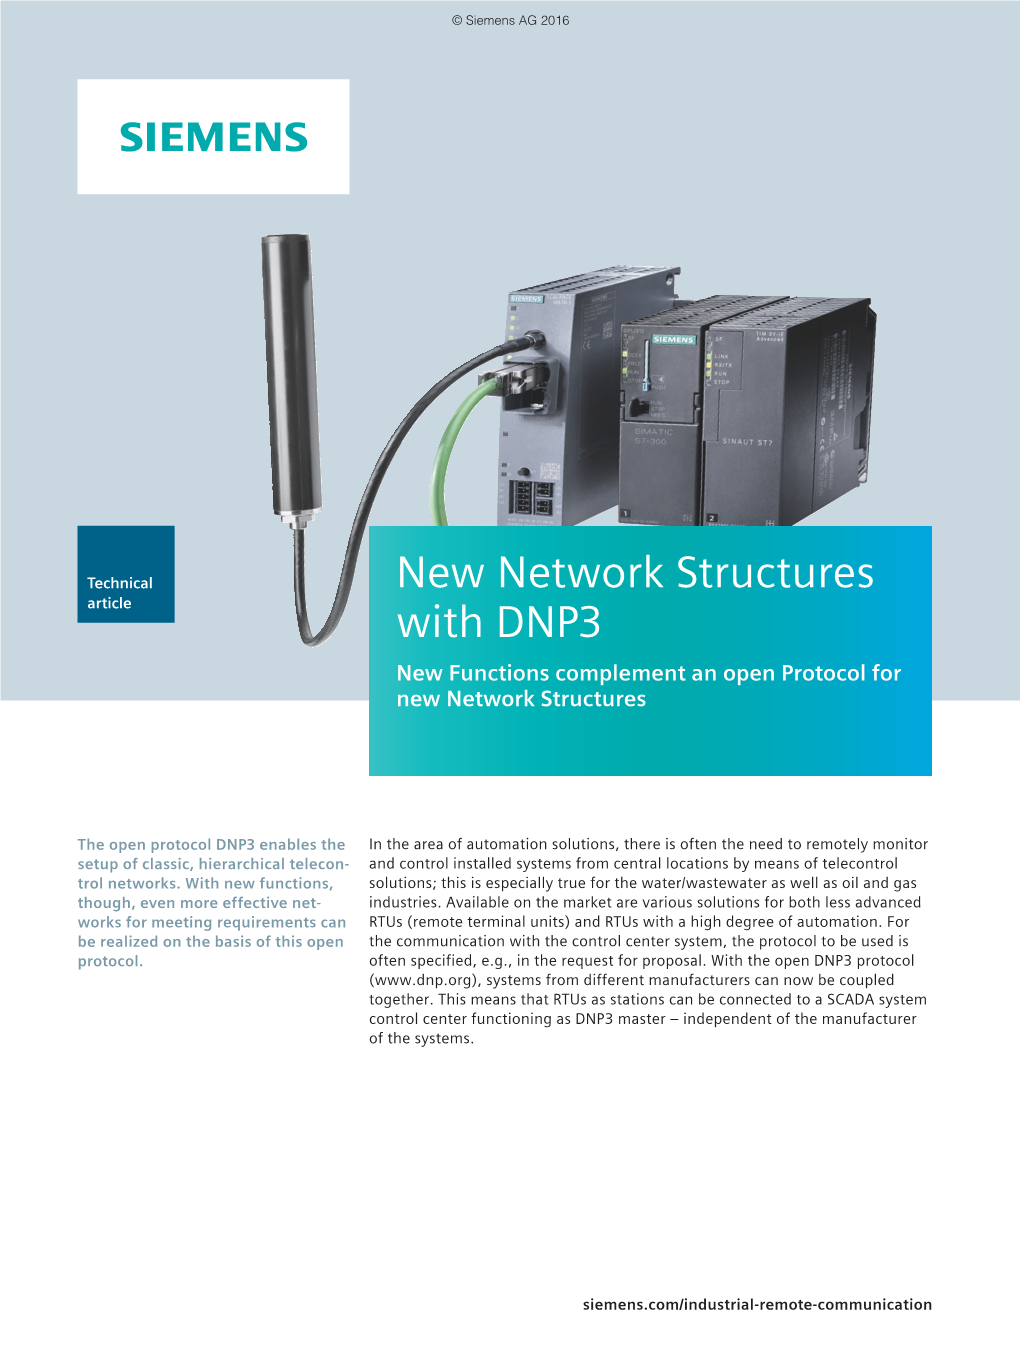 New Network Structures with DNP3